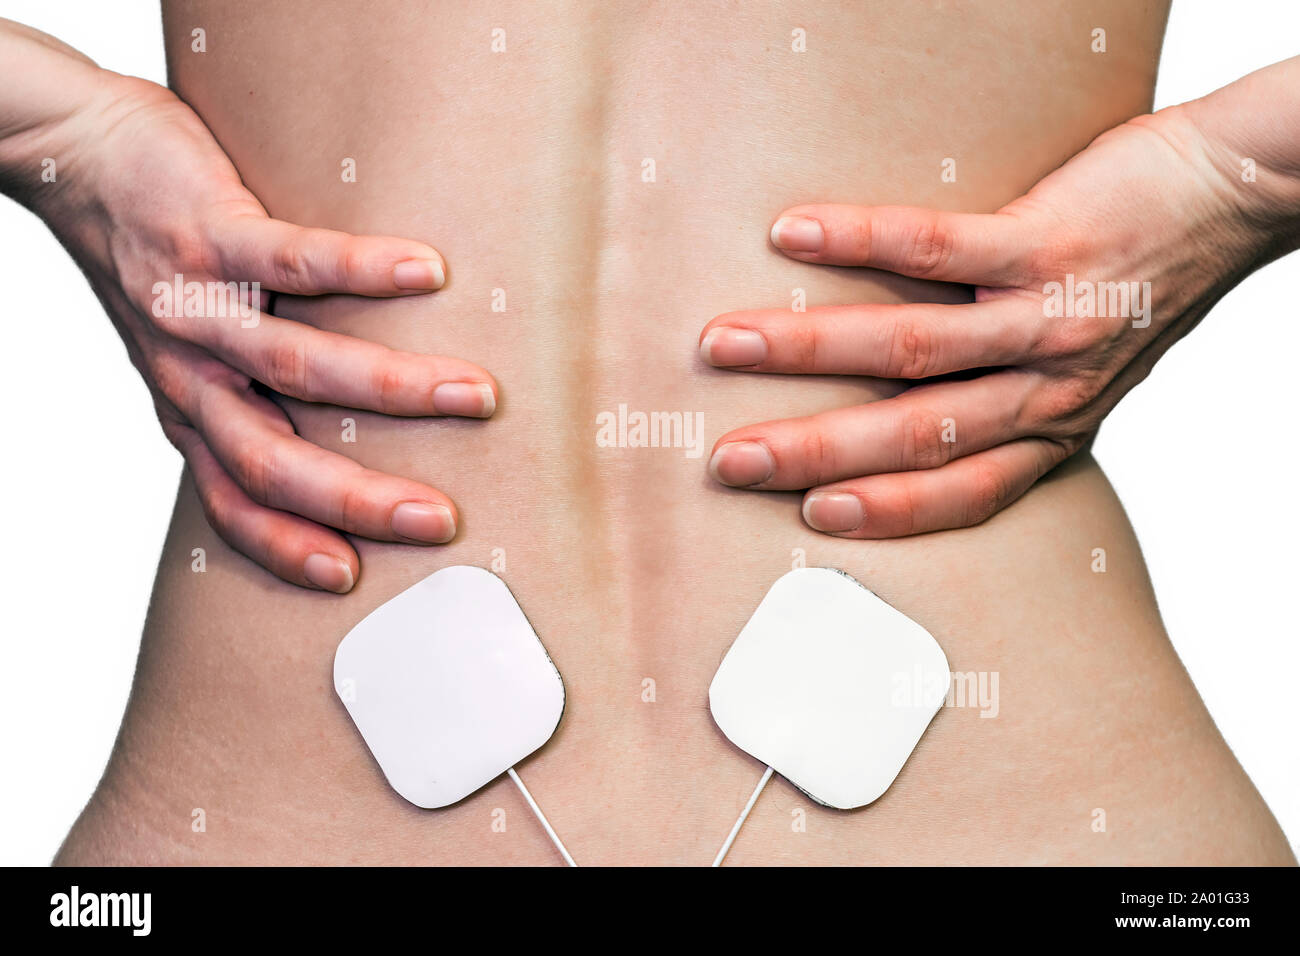 Electrotherapy for the treatment of pain in the lumbar region Stock Photo